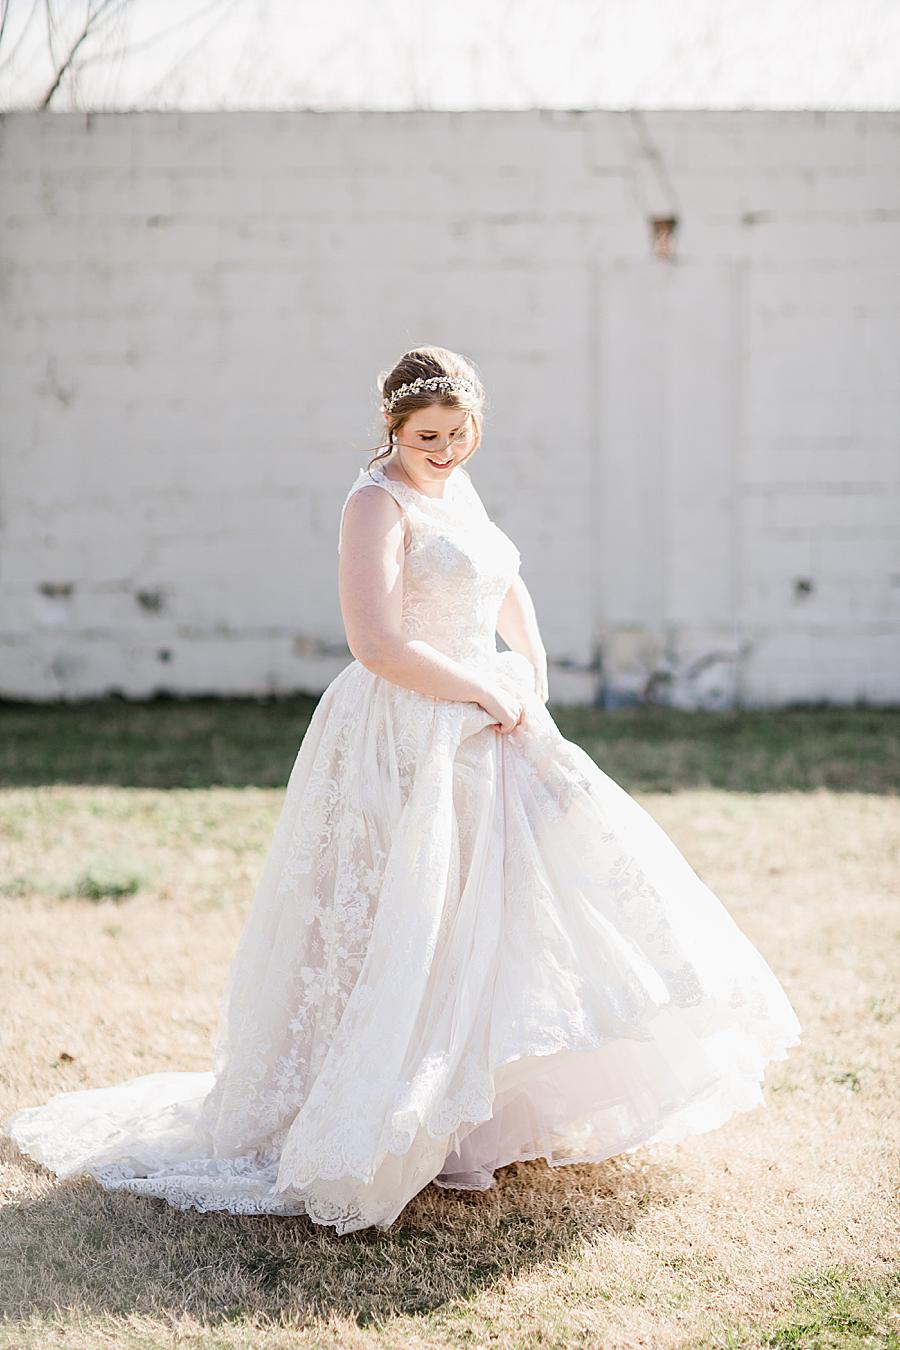 Twirling dress at this Relix Theater Wedding by Knoxville Wedding Photographer, Amanda May Photos.